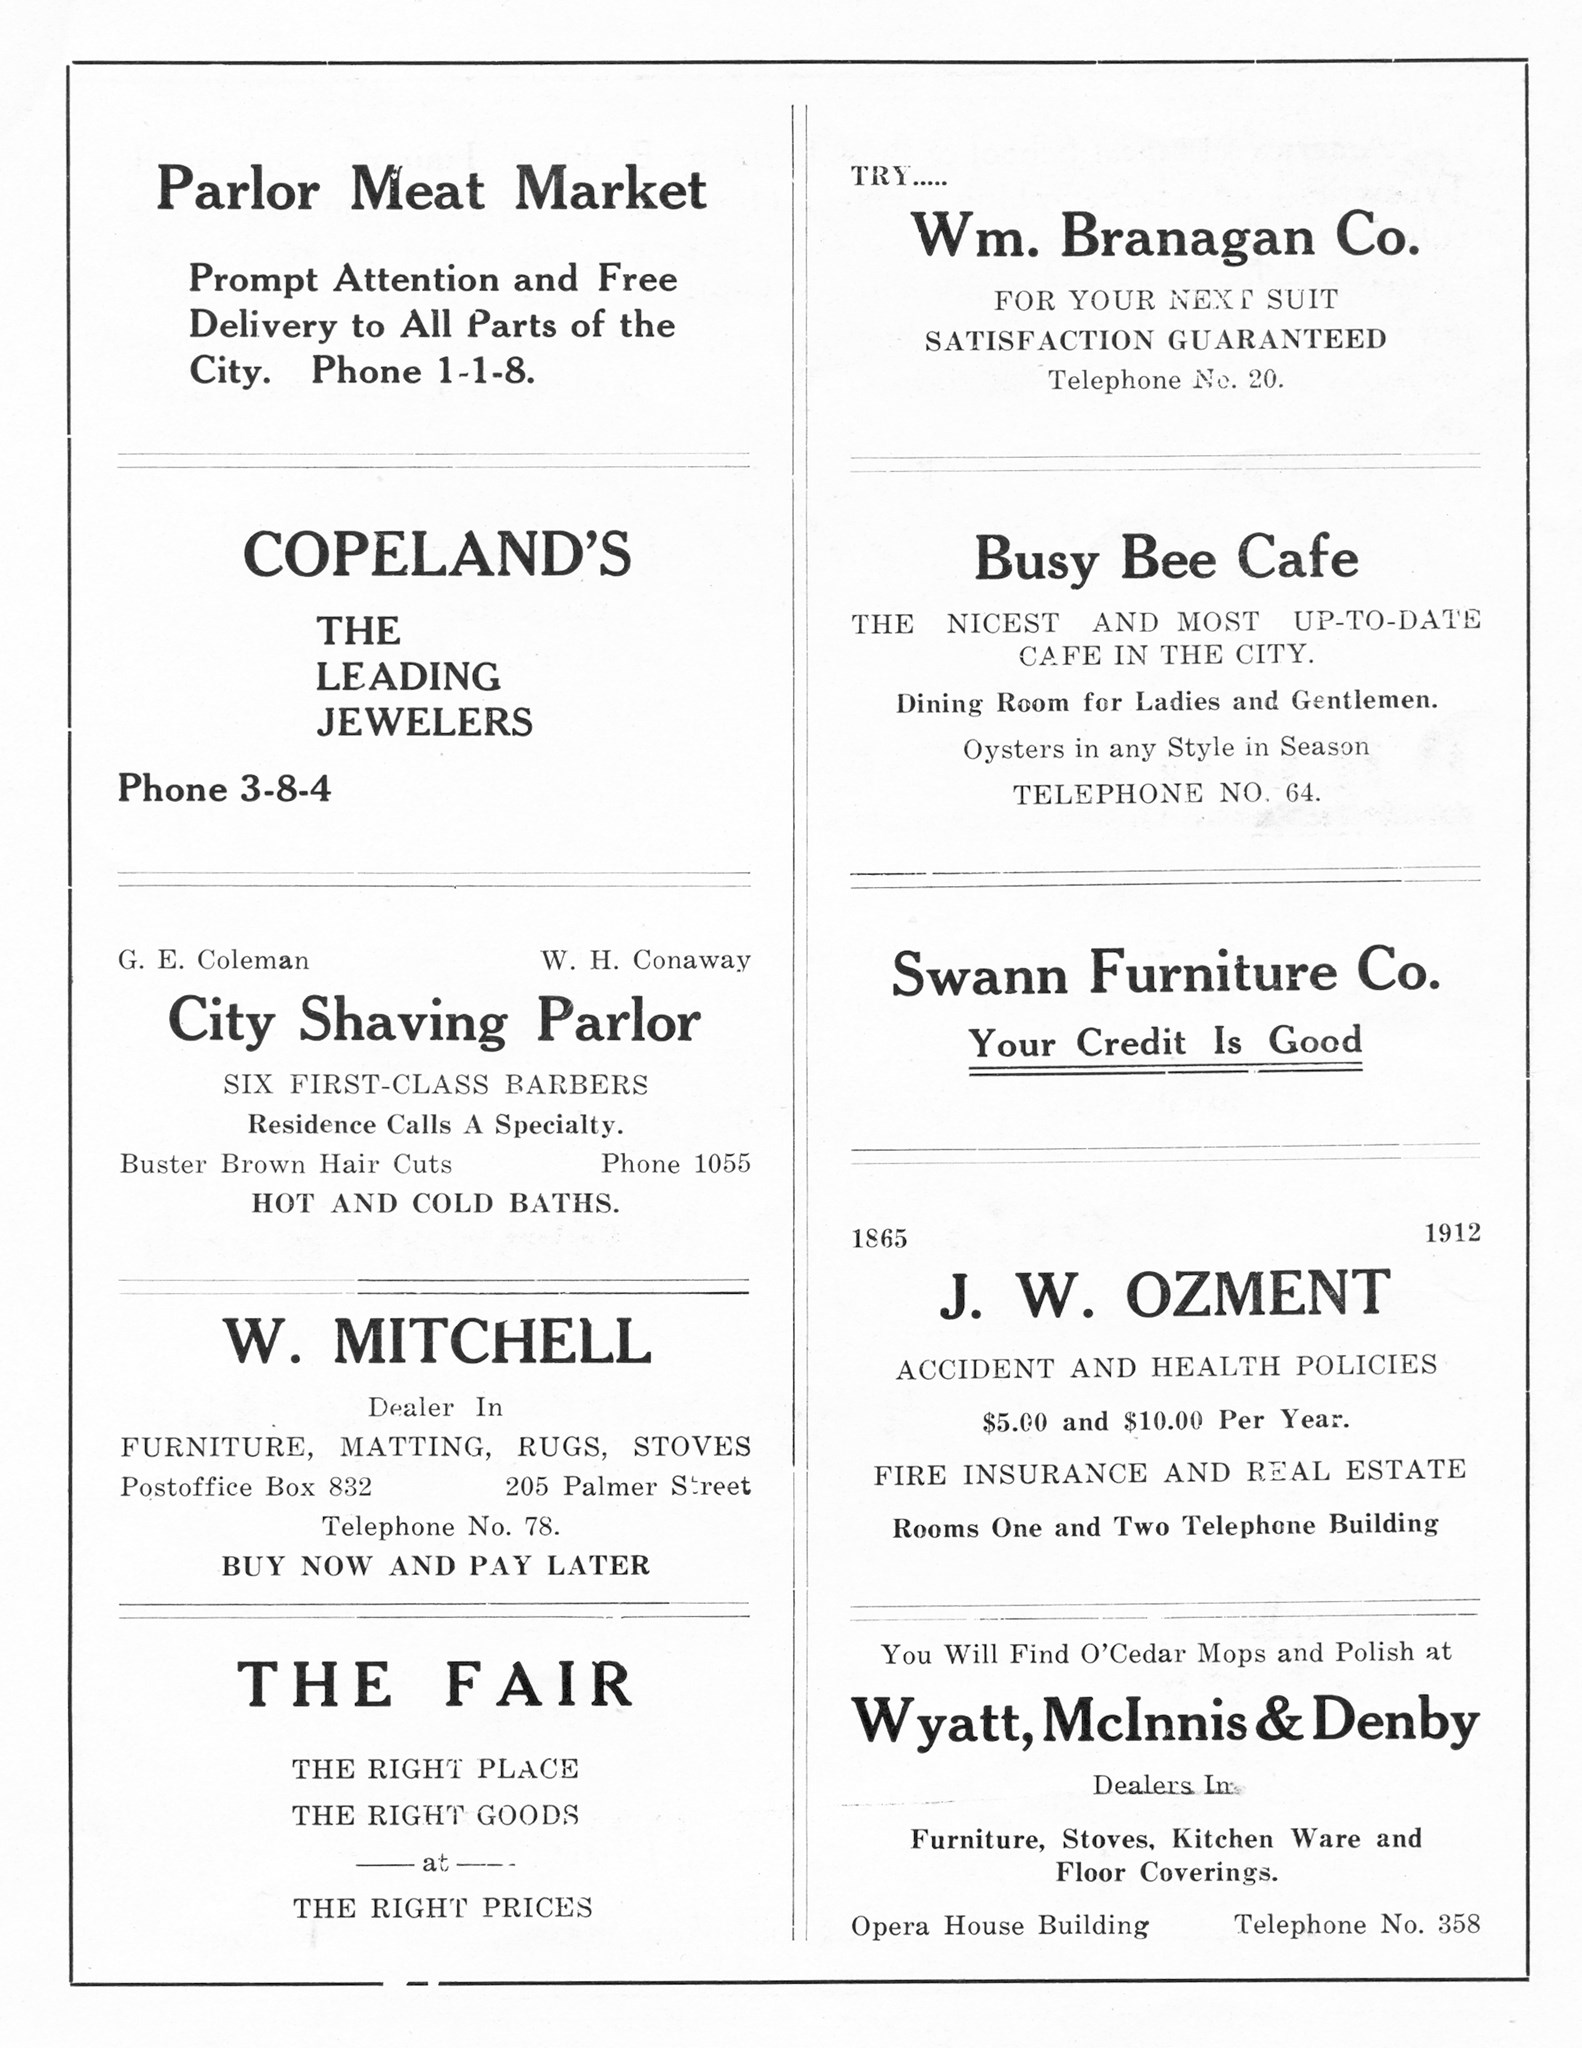 ../../../Images/Large/1912/Arclight-1912-pg0072.jpg